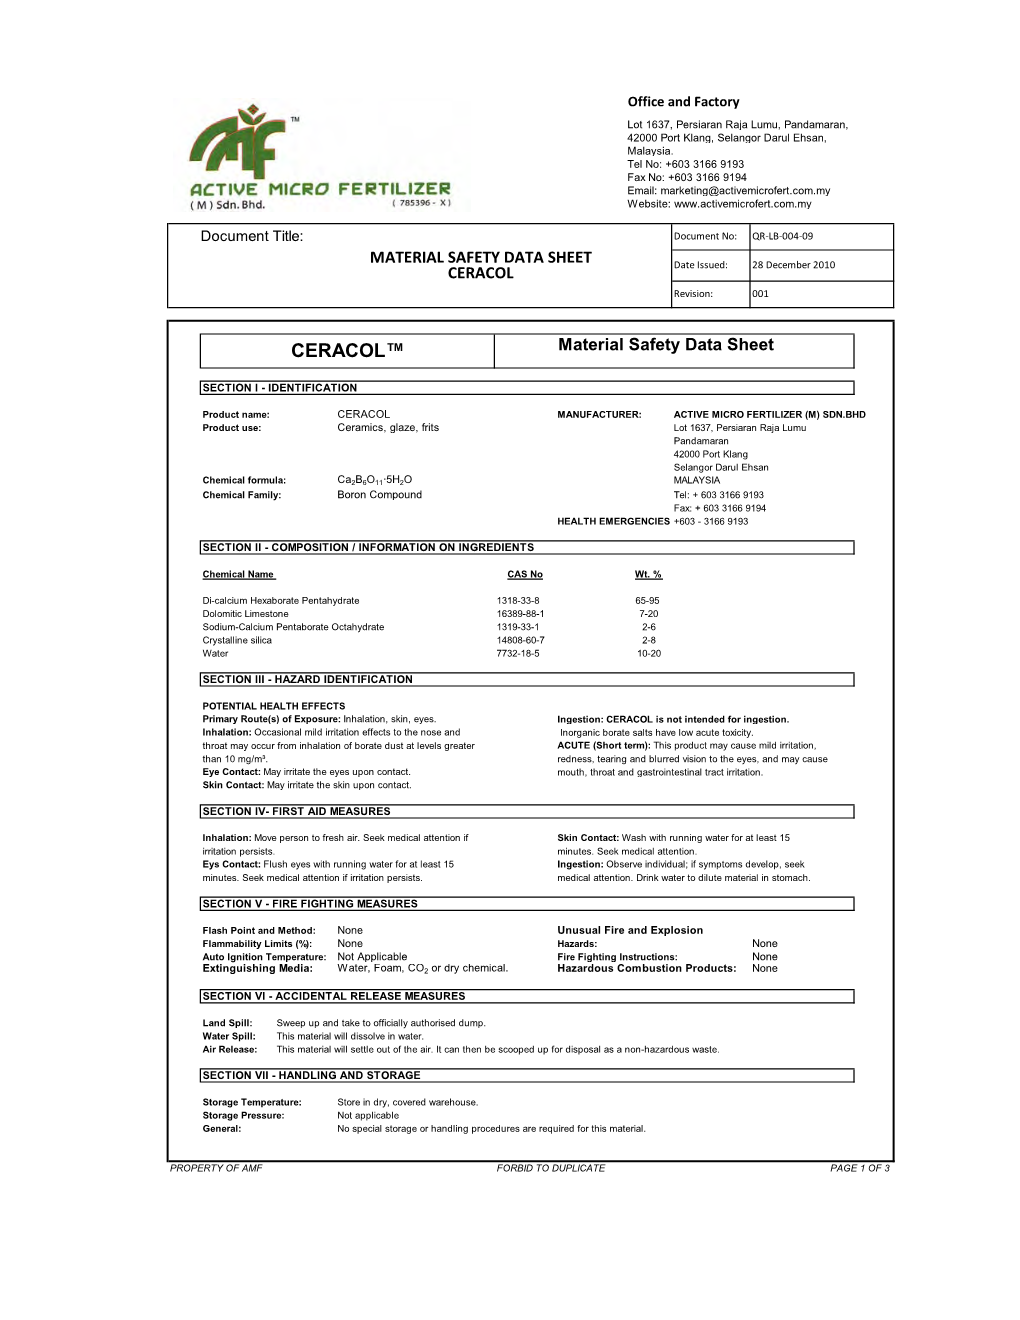 CERACOL™ Material Safety Data Sheet